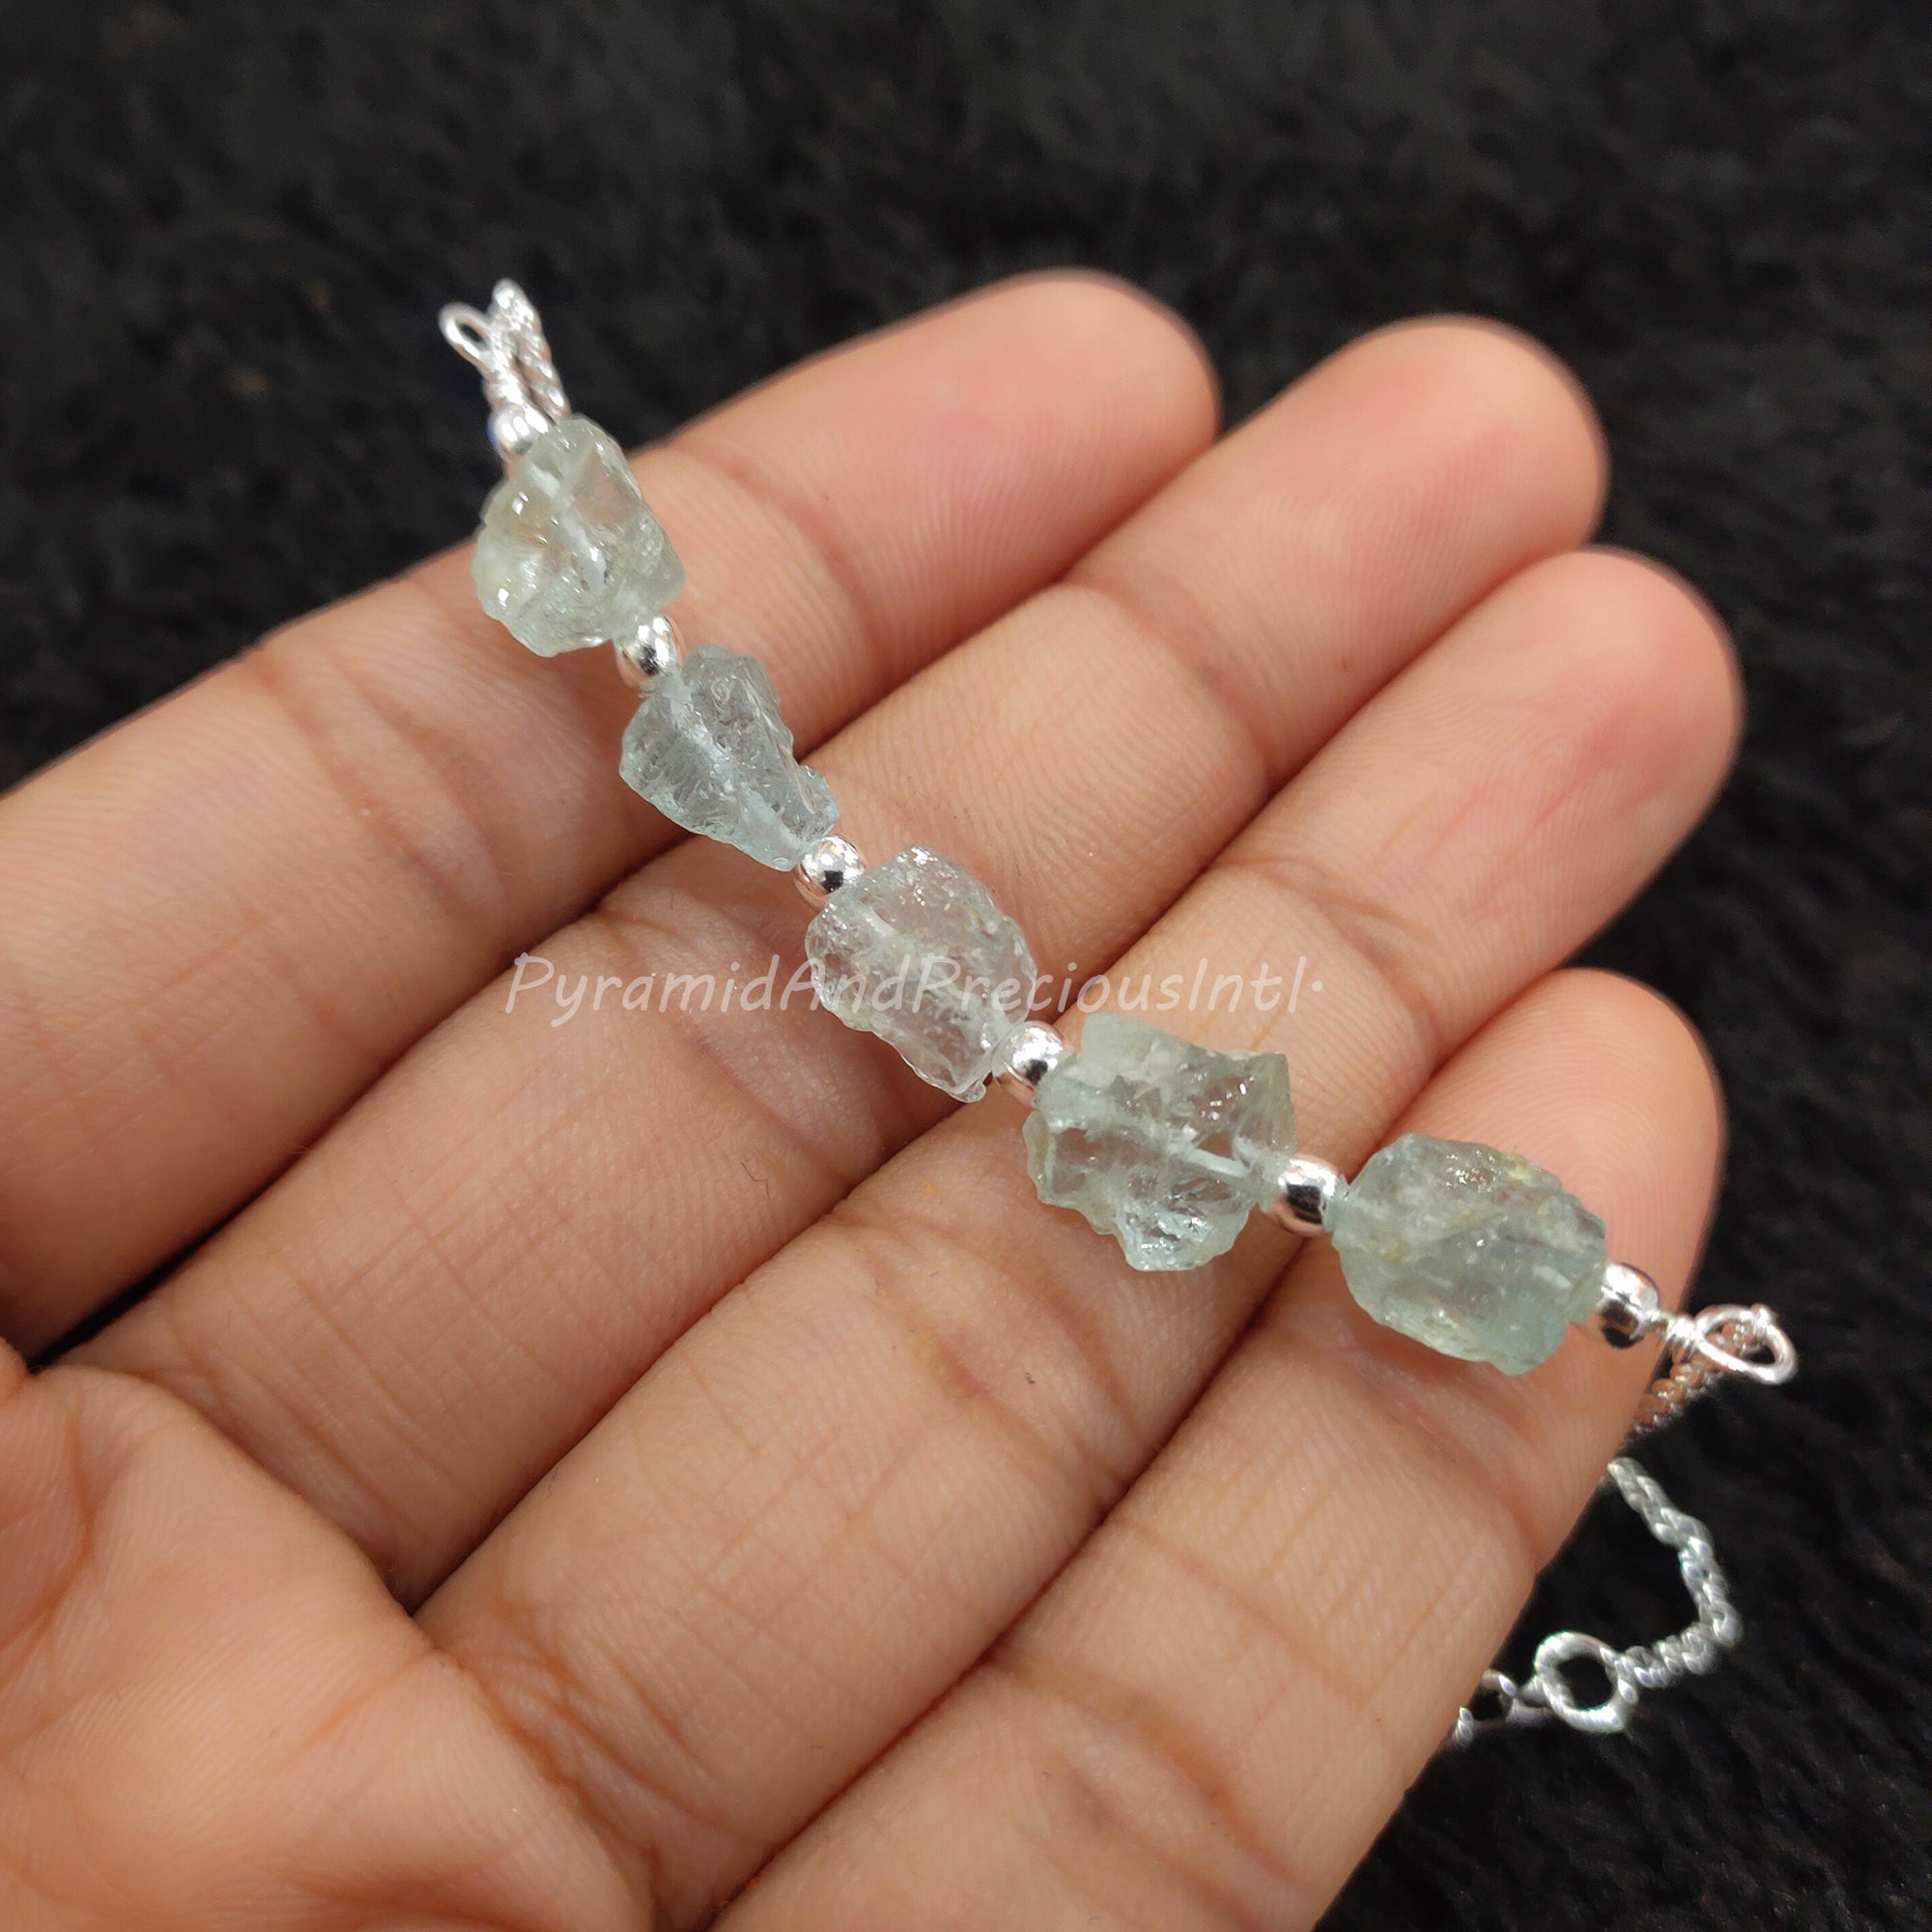 Natural Raw Aquamarine Silver Electroplated Bracelet, March Birthstone